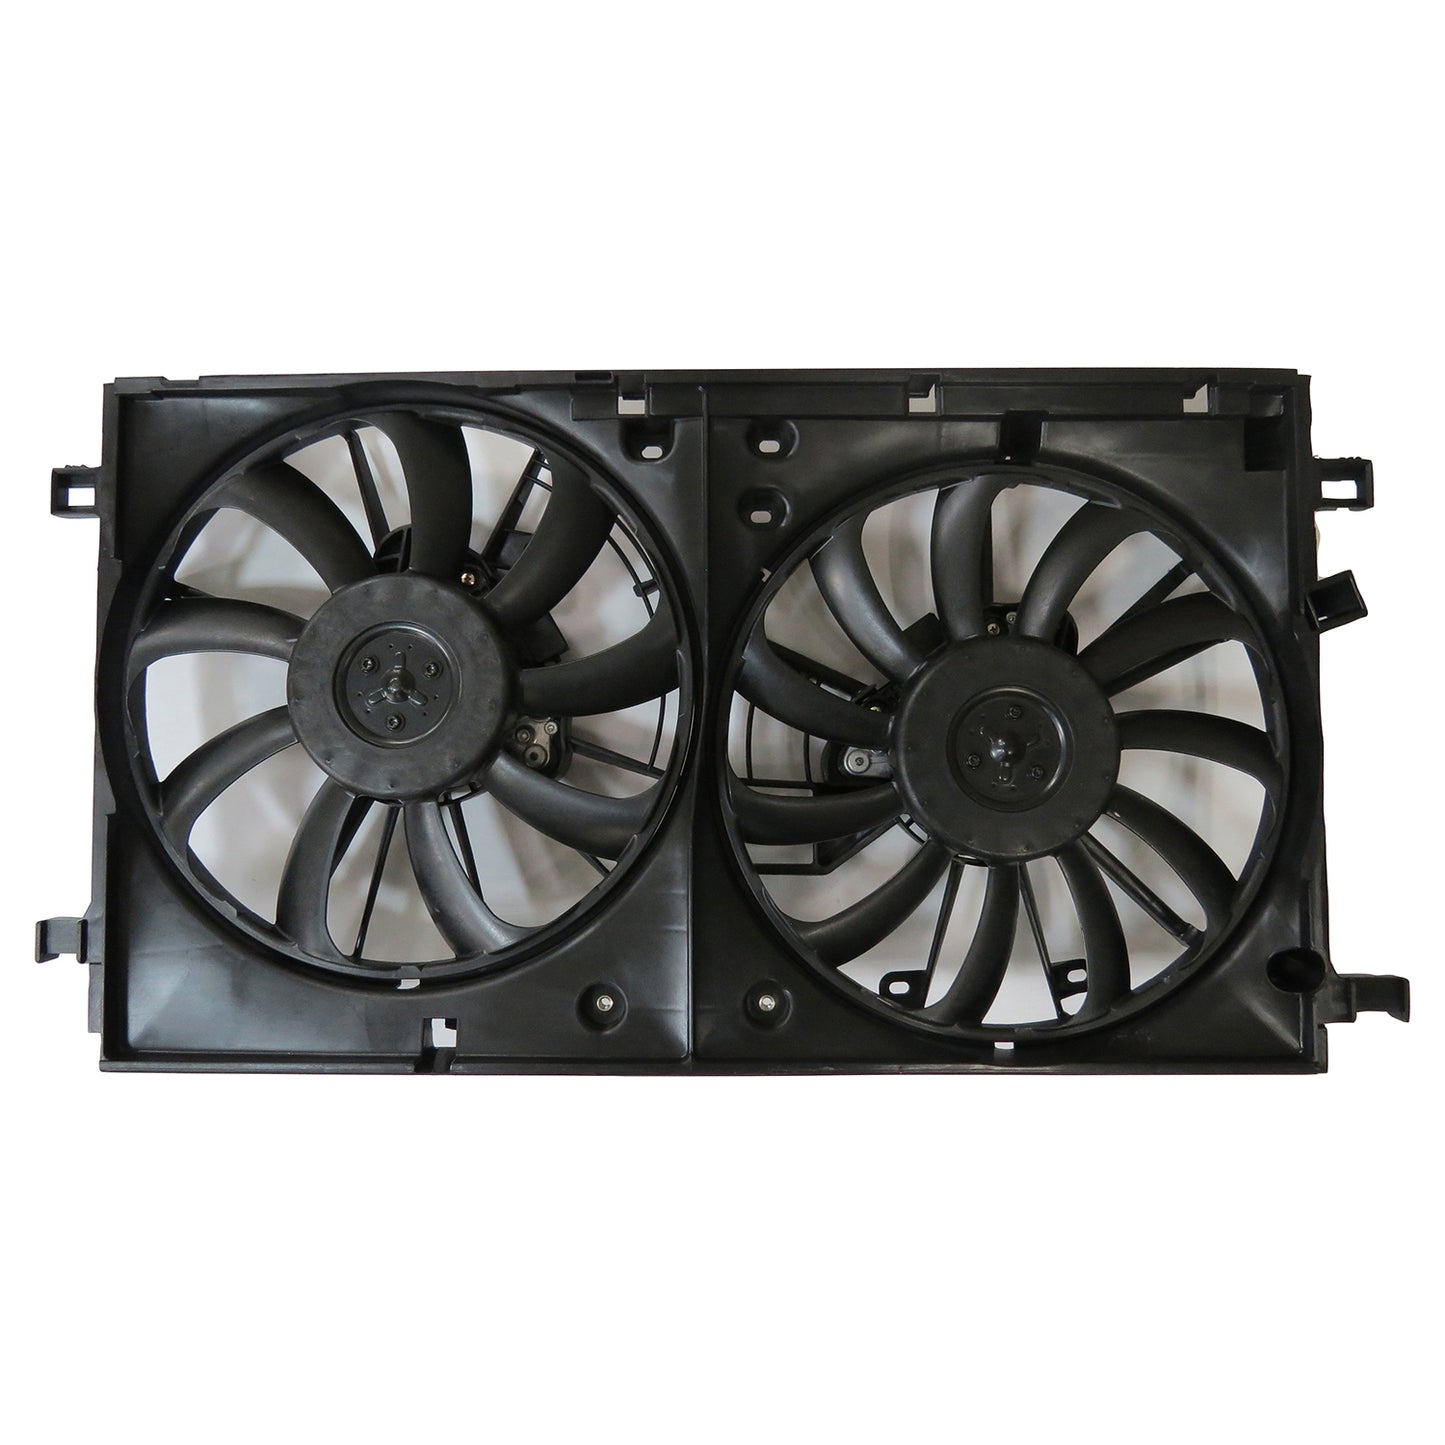 2880 | 2017-2020 TOYOTA PRIUS PRIME Radiator cooling fan assy Motor/Blade/Shroud Dual Fan Assy; see notes | TO3115212|1671137180-PFM